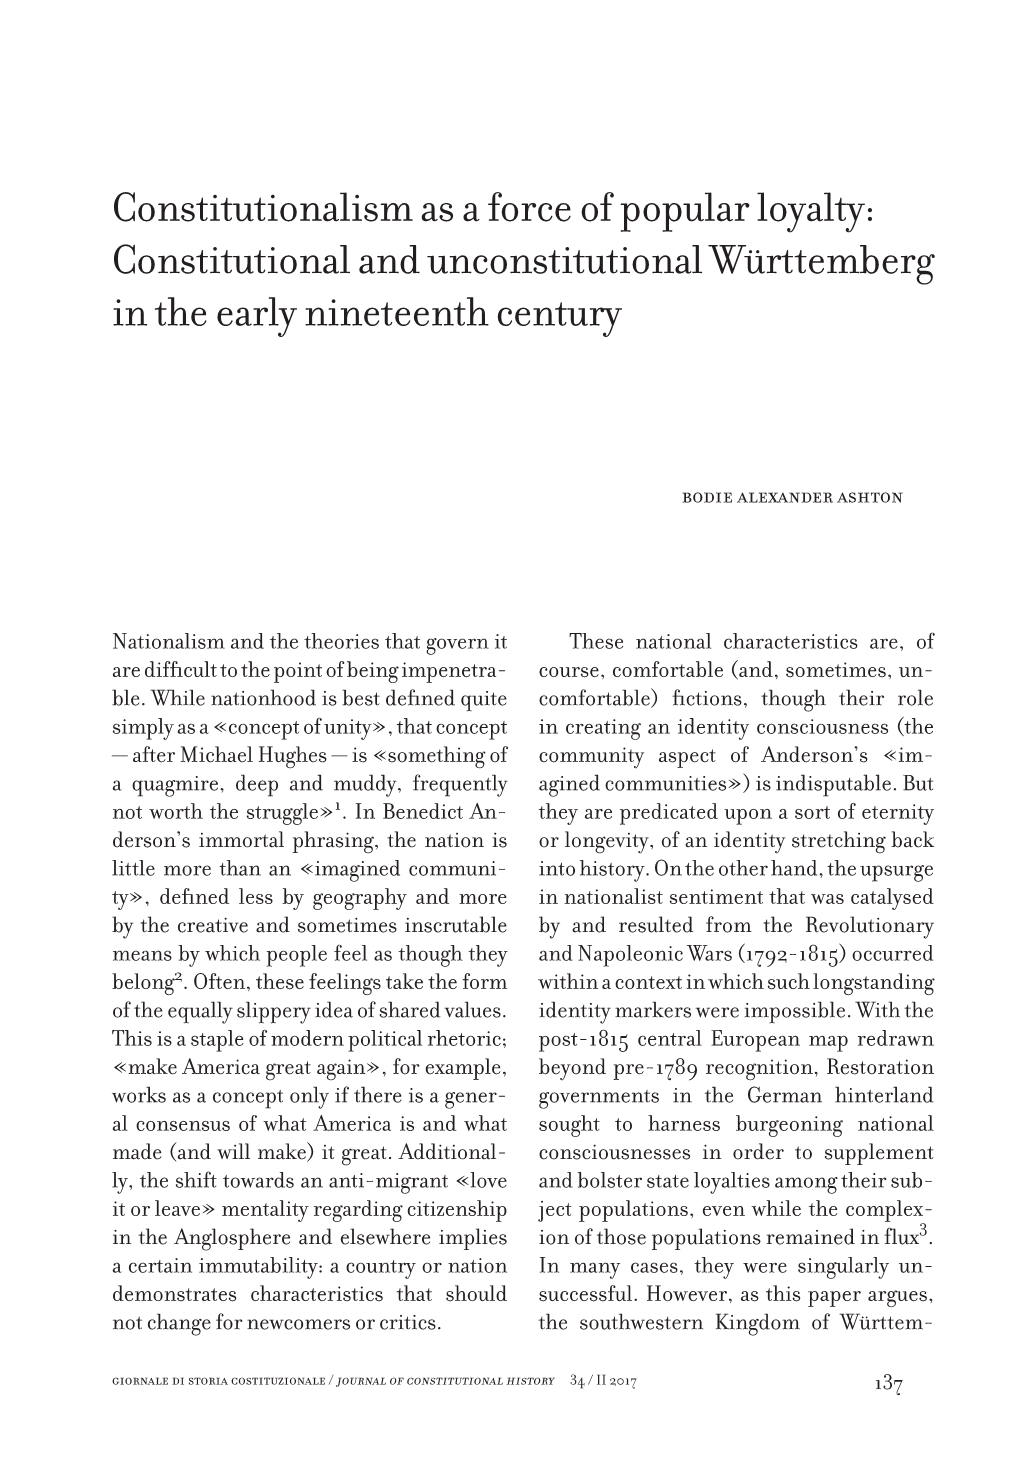 Constitutionalism As a Force of Popular Loyalty: Constitutional and Unconstitutional Württemberg in the Early Nineteenth Century